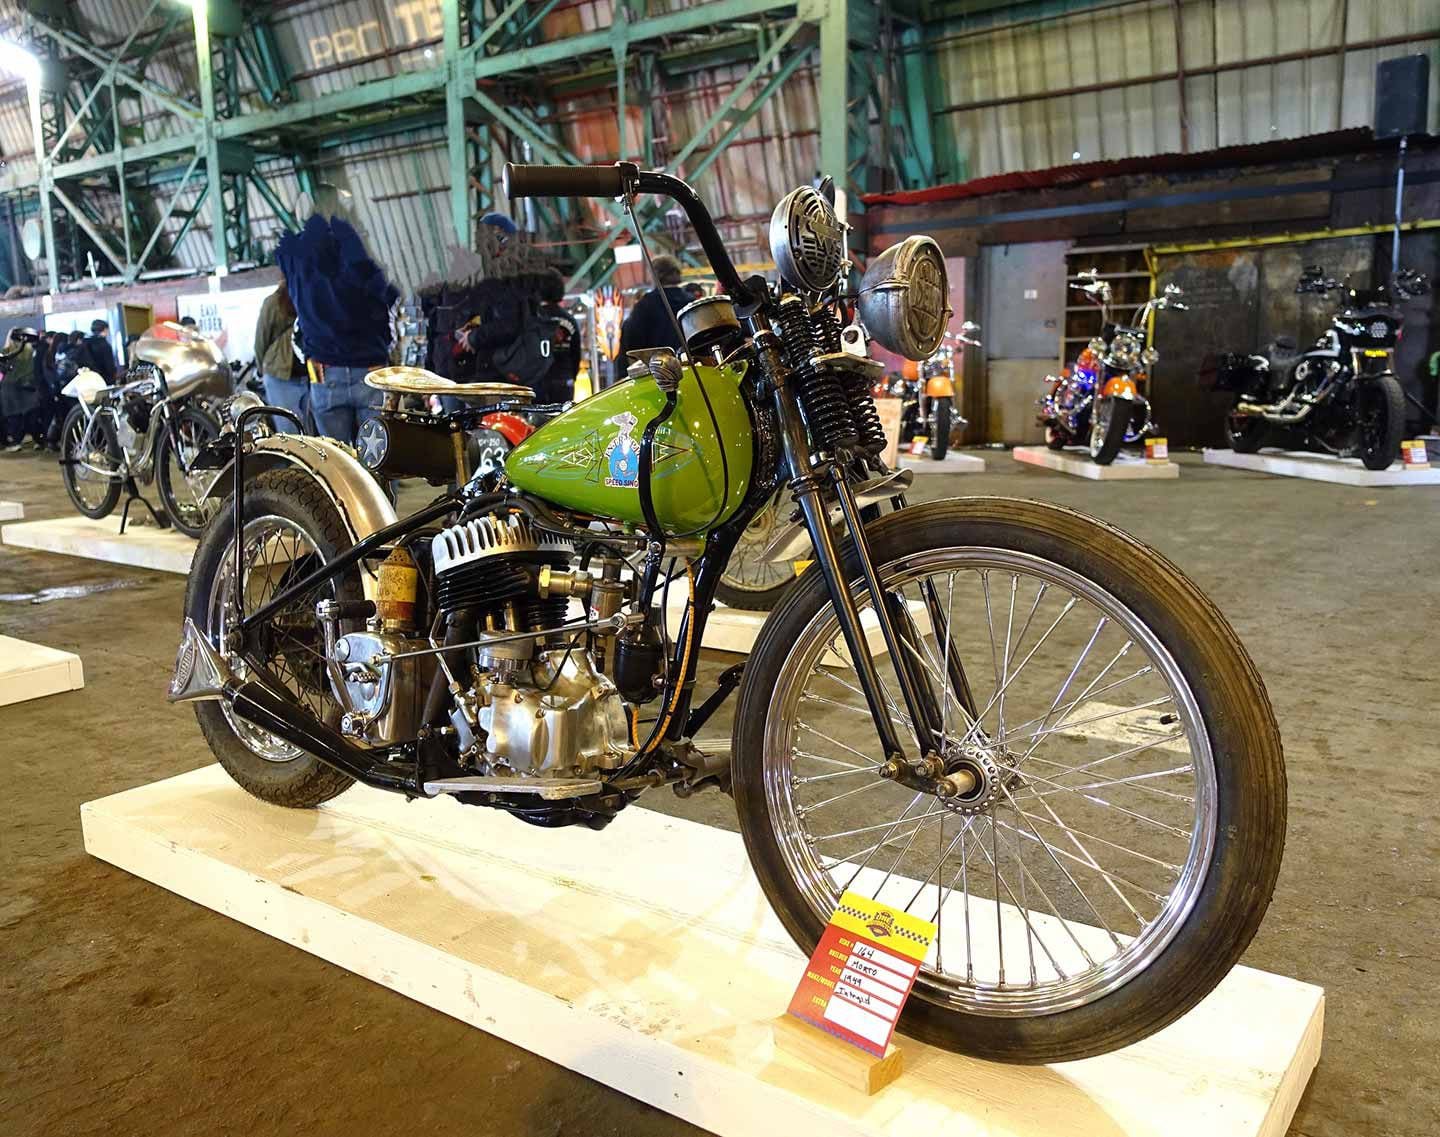 Show regular Morto Olson brought yet another meticulous build this year, based on a 1949 Intrepid.